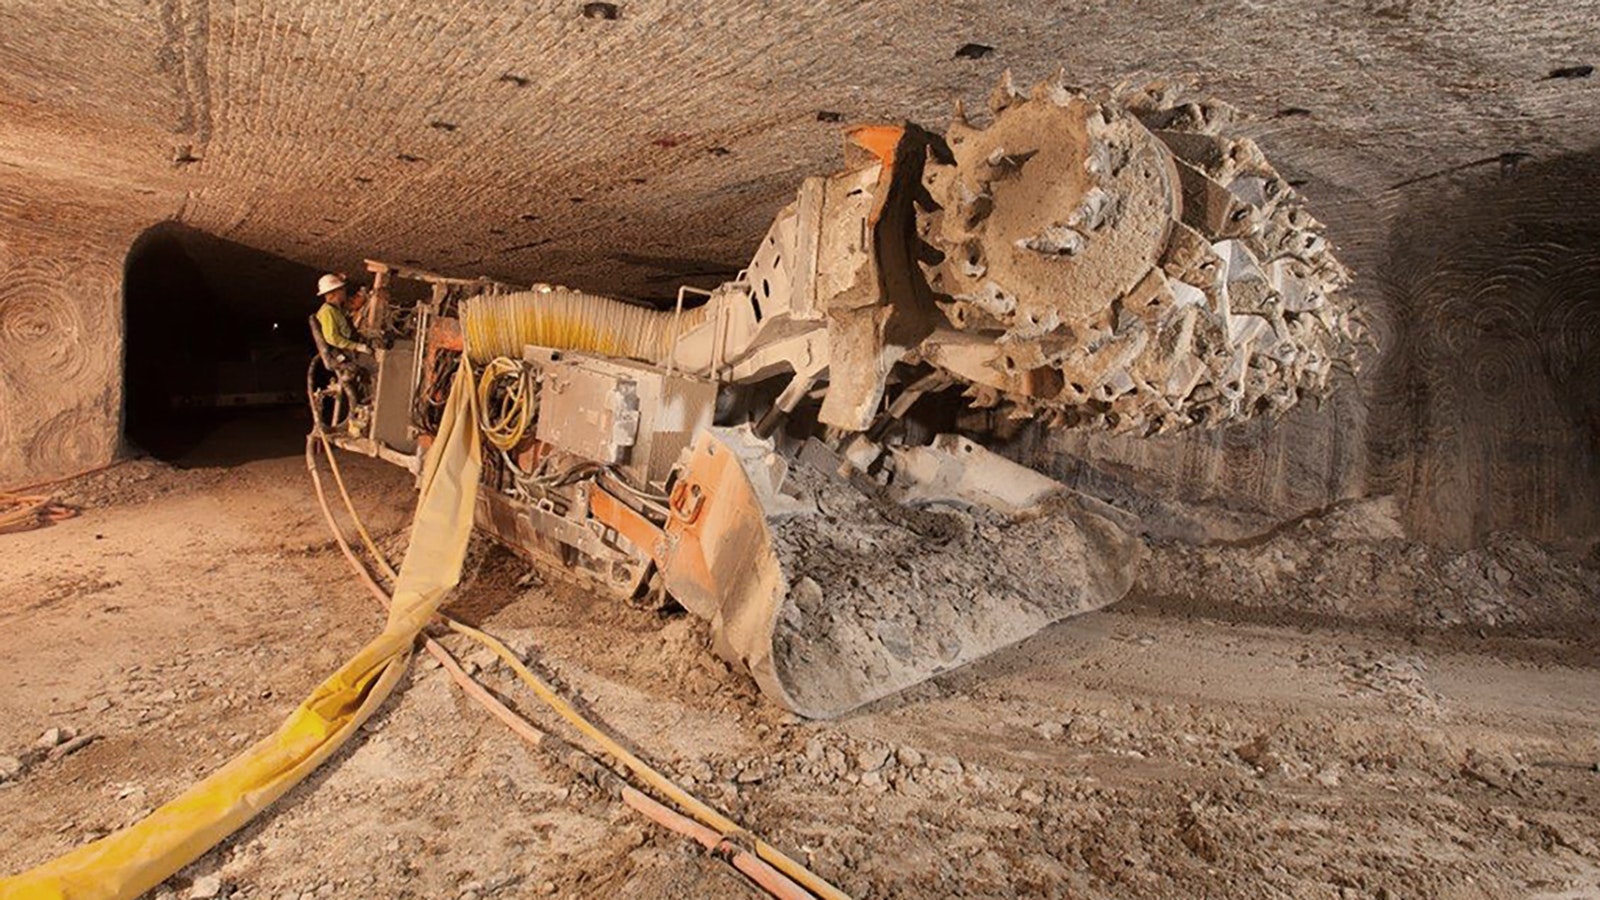 Trona is mined underground using heavy equipment like this continuous miner. The ore is then carried to the surface and processed.